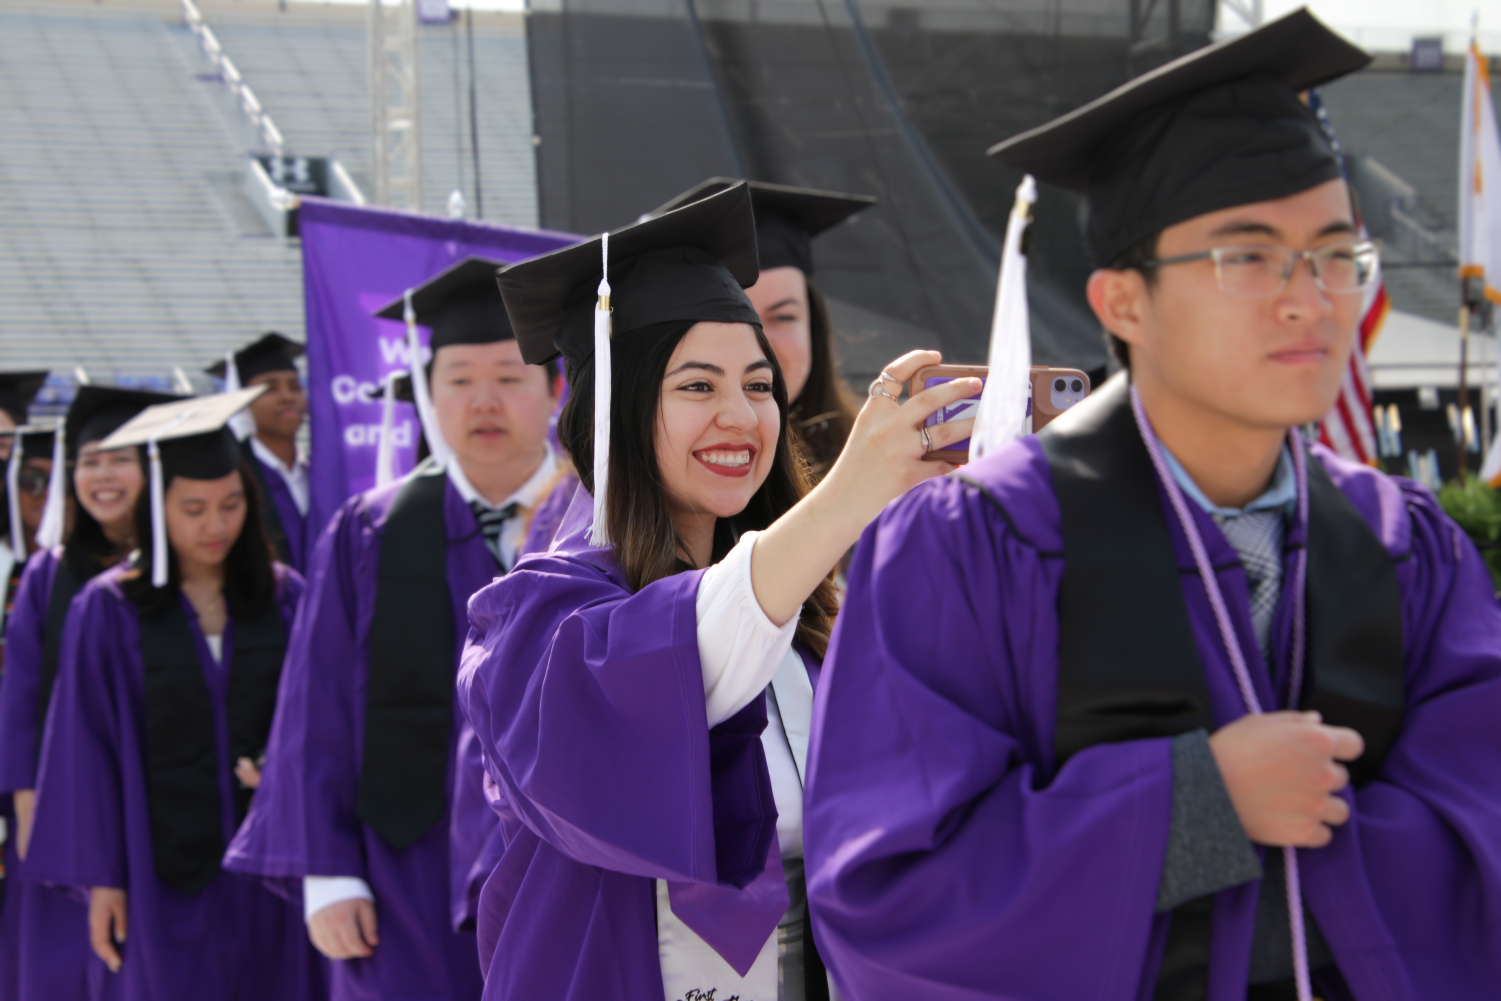 A student looks into their phone camera while walking in a line of people wearing purple gowns.